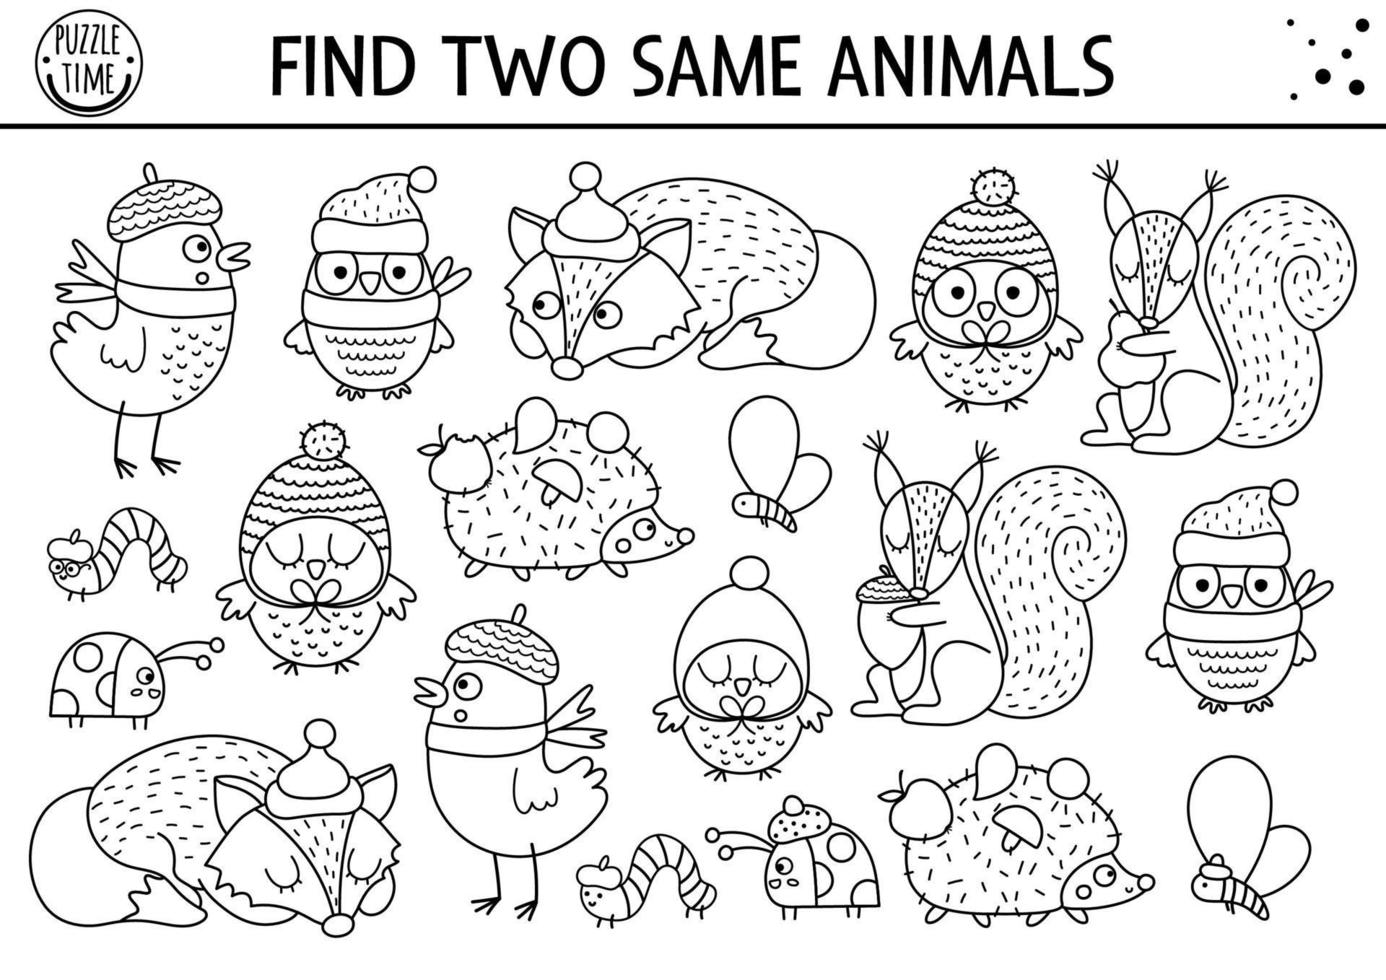 Find two same animals. Thanksgiving black and white matching activity for children. Funny line autumn quiz worksheet for kids for attention skills. Simple fall printable game or coloring page vector